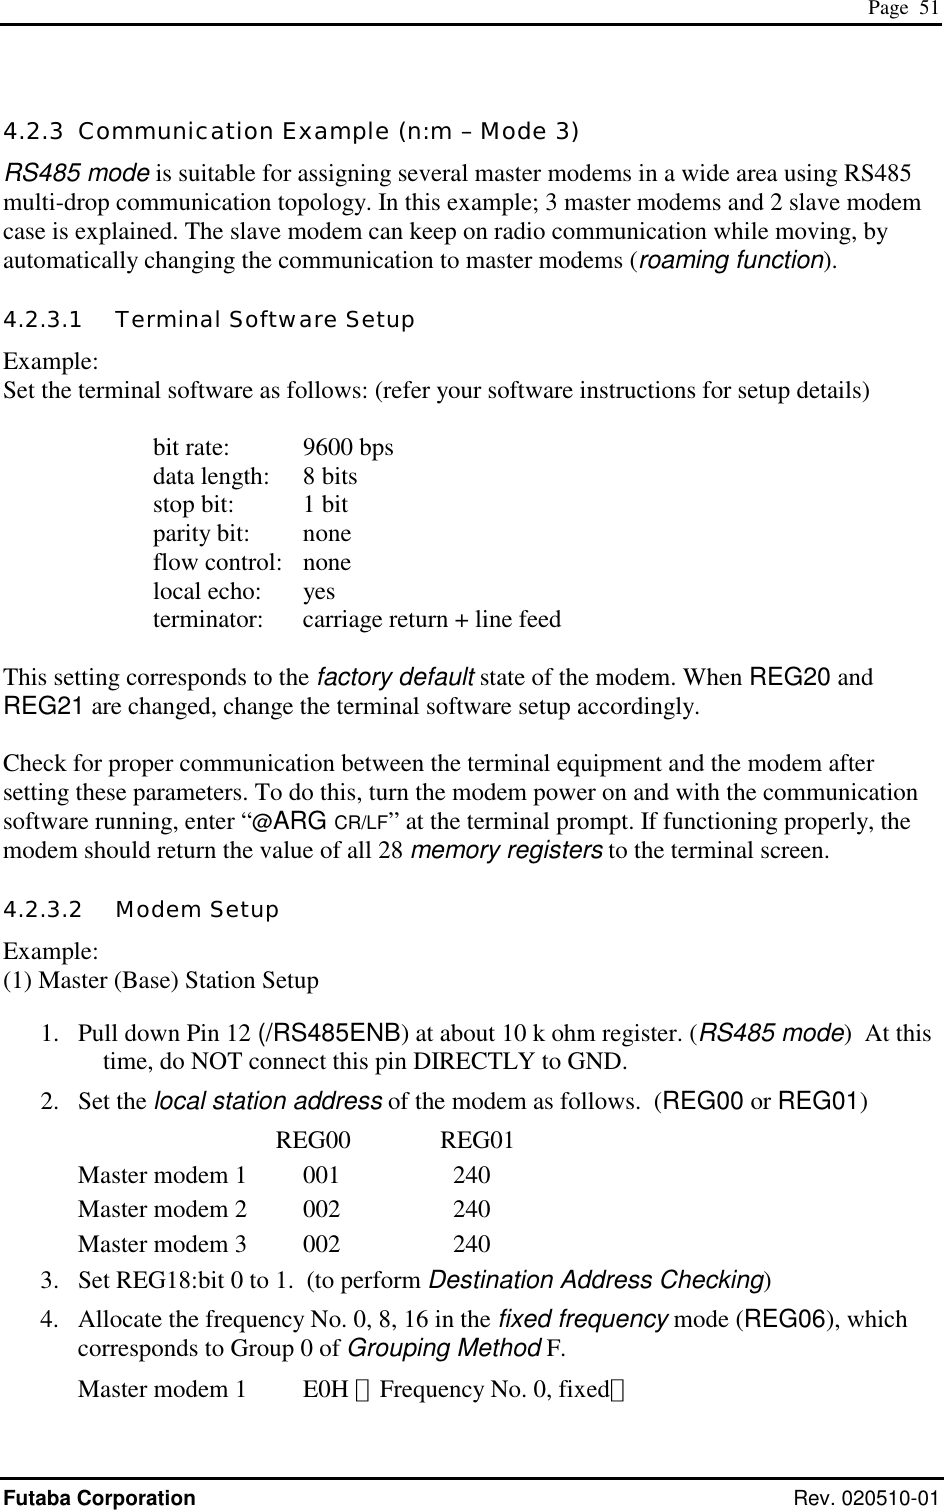  Page  51 Futaba Corporation Rev. 020510-01 4.2.3  Communication Example (n:m – Mode 3) RS485 mode is suitable for assigning several master modems in a wide area using RS485 multi-drop communication topology. In this example; 3 master modems and 2 slave modem case is explained. The slave modem can keep on radio communication while moving, by automatically changing the communication to master modems (roaming function).   4.2.3.1   Terminal Software Setup Example: Set the terminal software as follows: (refer your software instructions for setup details)    bit rate: 9600 bps      data length:  8 bits      stop bit:  1 bit      parity bit:  none      flow control:  none      local echo:  yes      terminator:  carriage return + line feed  This setting corresponds to the factory default state of the modem. When REG20 and REG21 are changed, change the terminal software setup accordingly.   Check for proper communication between the terminal equipment and the modem after setting these parameters. To do this, turn the modem power on and with the communication software running, enter “@ARG CR/LF” at the terminal prompt. If functioning properly, the modem should return the value of all 28 memory registers to the terminal screen. 4.2.3.2   Modem Setup Example: (1) Master (Base) Station Setup  1.  Pull down Pin 12 (/RS485ENB) at about 10 k ohm register. (RS485 mode)  At this time, do NOT connect this pin DIRECTLY to GND. 2. Set the local station address of the modem as follows.  (REG00 or REG01)   REG00              REG01 Master modem 1    001    240 Master modem 2   002    240 Master modem 3   002    240 3.  Set REG18:bit 0 to 1.  (to perform Destination Address Checking) 4.  Allocate the frequency No. 0, 8, 16 in the fixed frequency mode (REG06), which corresponds to Group 0 of Grouping Method F. Master modem 1    E0H （Frequency No. 0, fixed） 